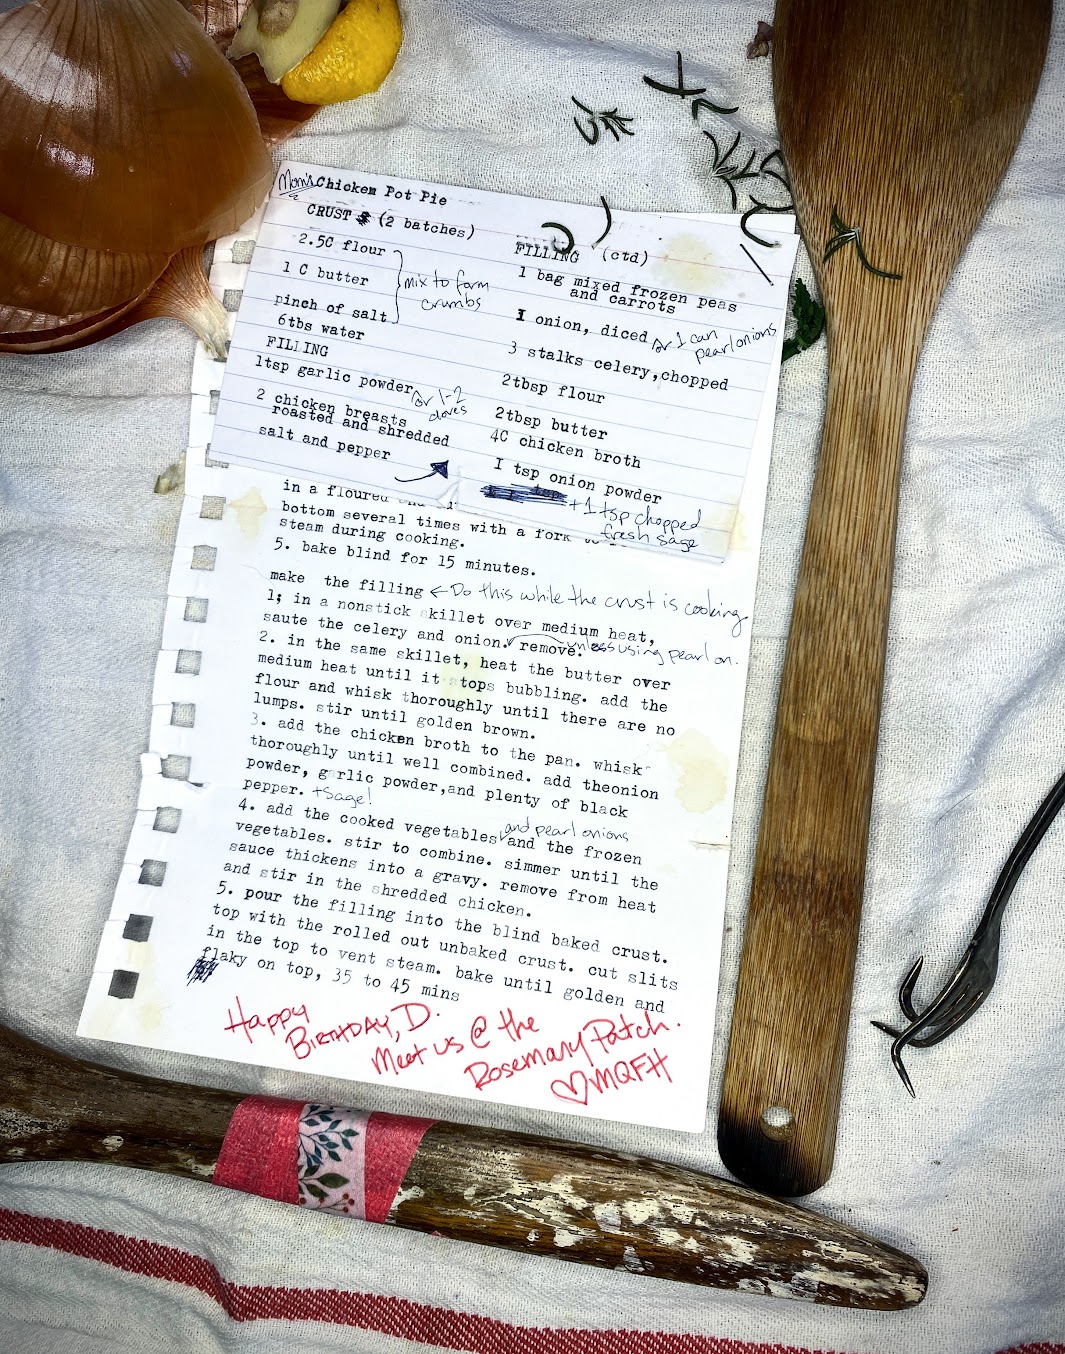 A recipe card, typewritten on an index card, stapled to a torn sheet of notebook paper with a typewritten recipe on it. Both are weathered, torn, stained, and annotated. The card is on top of a stained white kitchen towel, next to a couple of burned and repaired wooden cooking spoons, some onion and lemon scraps, a scattering of rosemary, and a bent fork. Visible recipe text is as follows (all is typewritten unless otherwise indicated; see story text for recipe in full):
Index card: Chicken Pot Pie (handwritten annotation reading “Mom’s”)
Crust (2 batches)
2½ cups flour    
Pinch of salt    
1 cup butter (handwritten annotation indicates these three ingredients should be mixed to form crumbs)
6 tablespoons water
Filling
1 teaspoon garlic powder – handwritten annotation reading “or 1-2 cloves”
2 chicken breasts roasted and shredded
Salt and pepper – hand-drawn arrow points up to the next column 
Filling continued
1 bag mixed frozen peas and carrots
1 onion, diced; handwritten annotation reading “or 1 can pearl onions”
3 stalks celery, chopped
2 tablespoons flour
2 tablespoons butter
4 cups chicken broth
1 teaspoon onion powder
(Several typing errors are scribbled out; handwritten annotation reading “1 tsp chopped fresh sage”)
The index card overlaps the recipe page. The recipe visible on the page is as follows:
5.	Bake blind for 15 minutes.  

Make the Filling (handwritten annotation indicates to do this while the crust is cooking.)
1.	In a nonstick skillet over medium heat, sauté the celery and onion. Handwritten note says “unless using pearl on.” Remove.
2.	In the same skillet, heat the butter over medium heat until it stops bubbling. Add the flour and whisk thoroughly until there are no lumps. Stir until golden brown.
3.	Add the chicken broth to the pan. Whisk thoroughly until well-combined. Add the onion powder, garlic powder, and plenty of black pepper. (Handwritten annotation reads “+ sage!”)
4.	Add the cooked vegetables (handwritten annotation reads “^or 1 can pearl onions”) and the frozen vegetables. Stir to combine. Simmer until the sauce thickens into a gravy. Remove from the heat and stir in the shredded chicken. 
7.	Pour the filling into the blind-baked crust. Top with the rolled-out unbaked crust. Cut slits in the top to vent steam. Bake until golden and flaky on top, 35–45 minutes. 
Below the recipe, a typing error is scribbled out. A handwritten note in different handwriting from the recipe annotations, in red marker, reads: “Happy birthday, D. Meet us @ the Rosemary Patch. Heart, MQFH”
